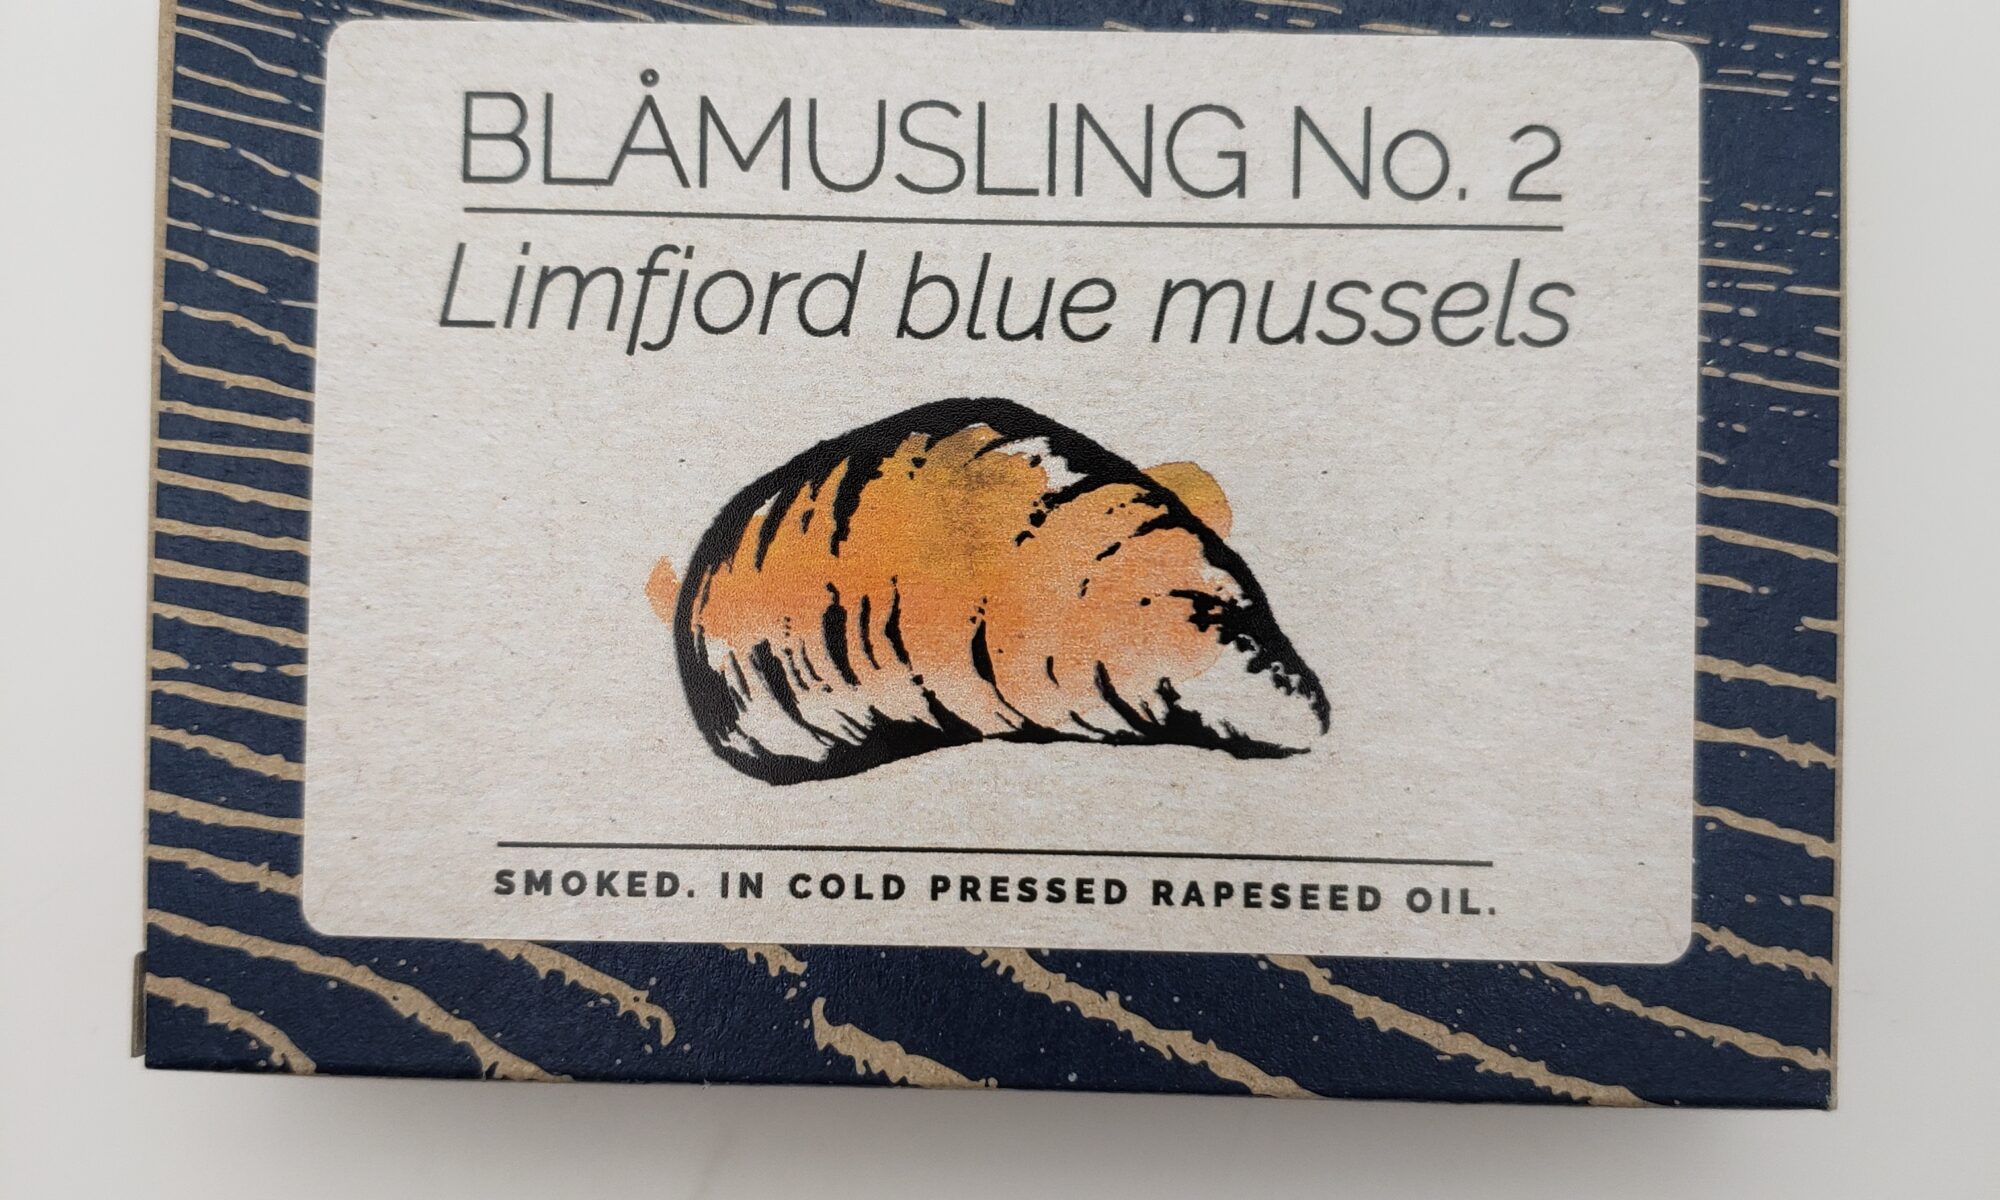 Image of Fangst Limfjord blue mussels